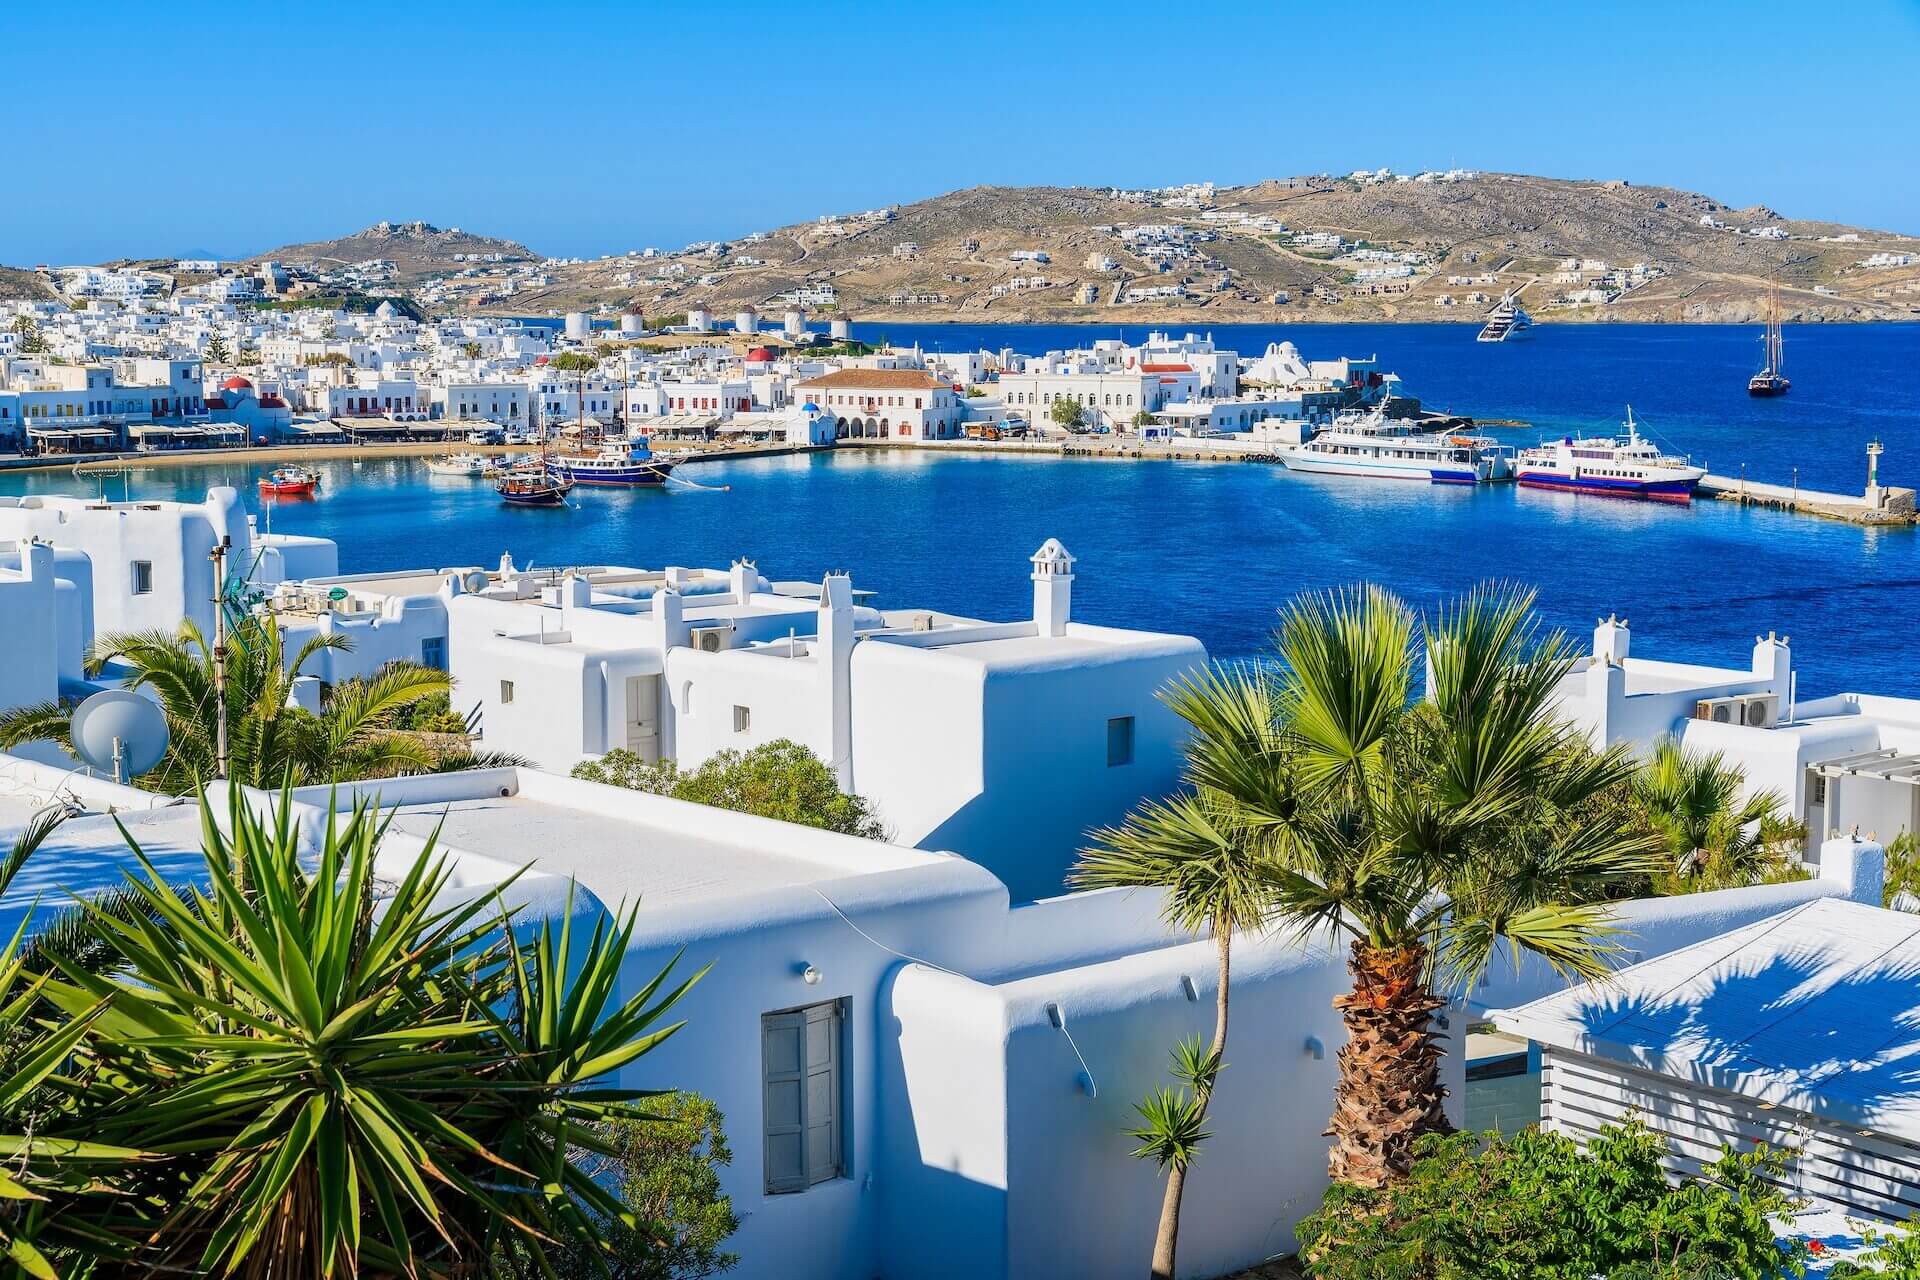 View of the old port in Mykonos town